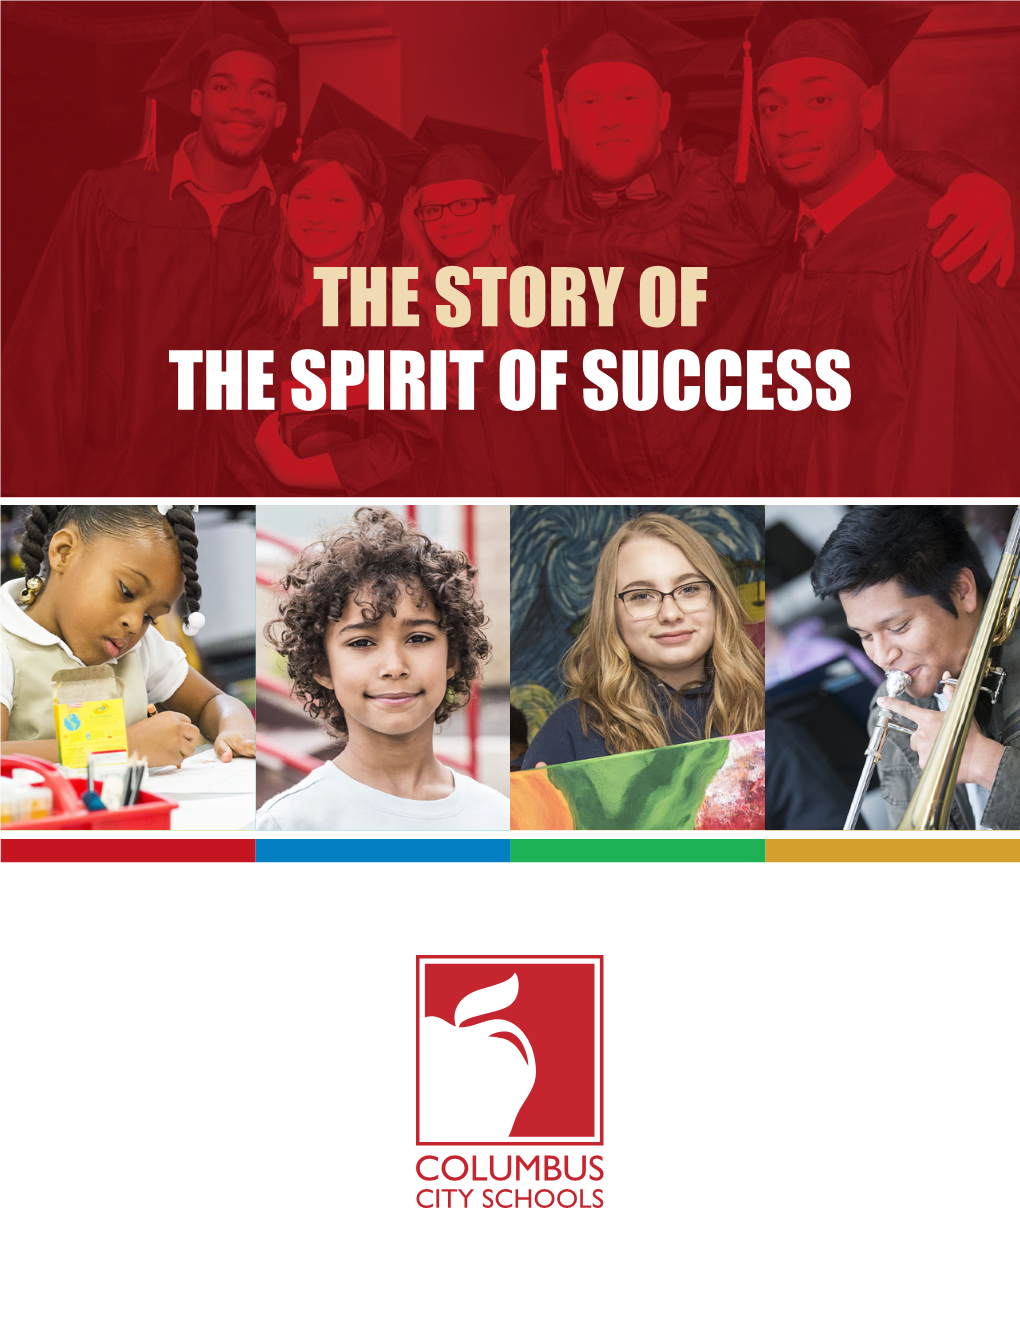 The Story of the Spirit of Success the Story of the Spirit of Success